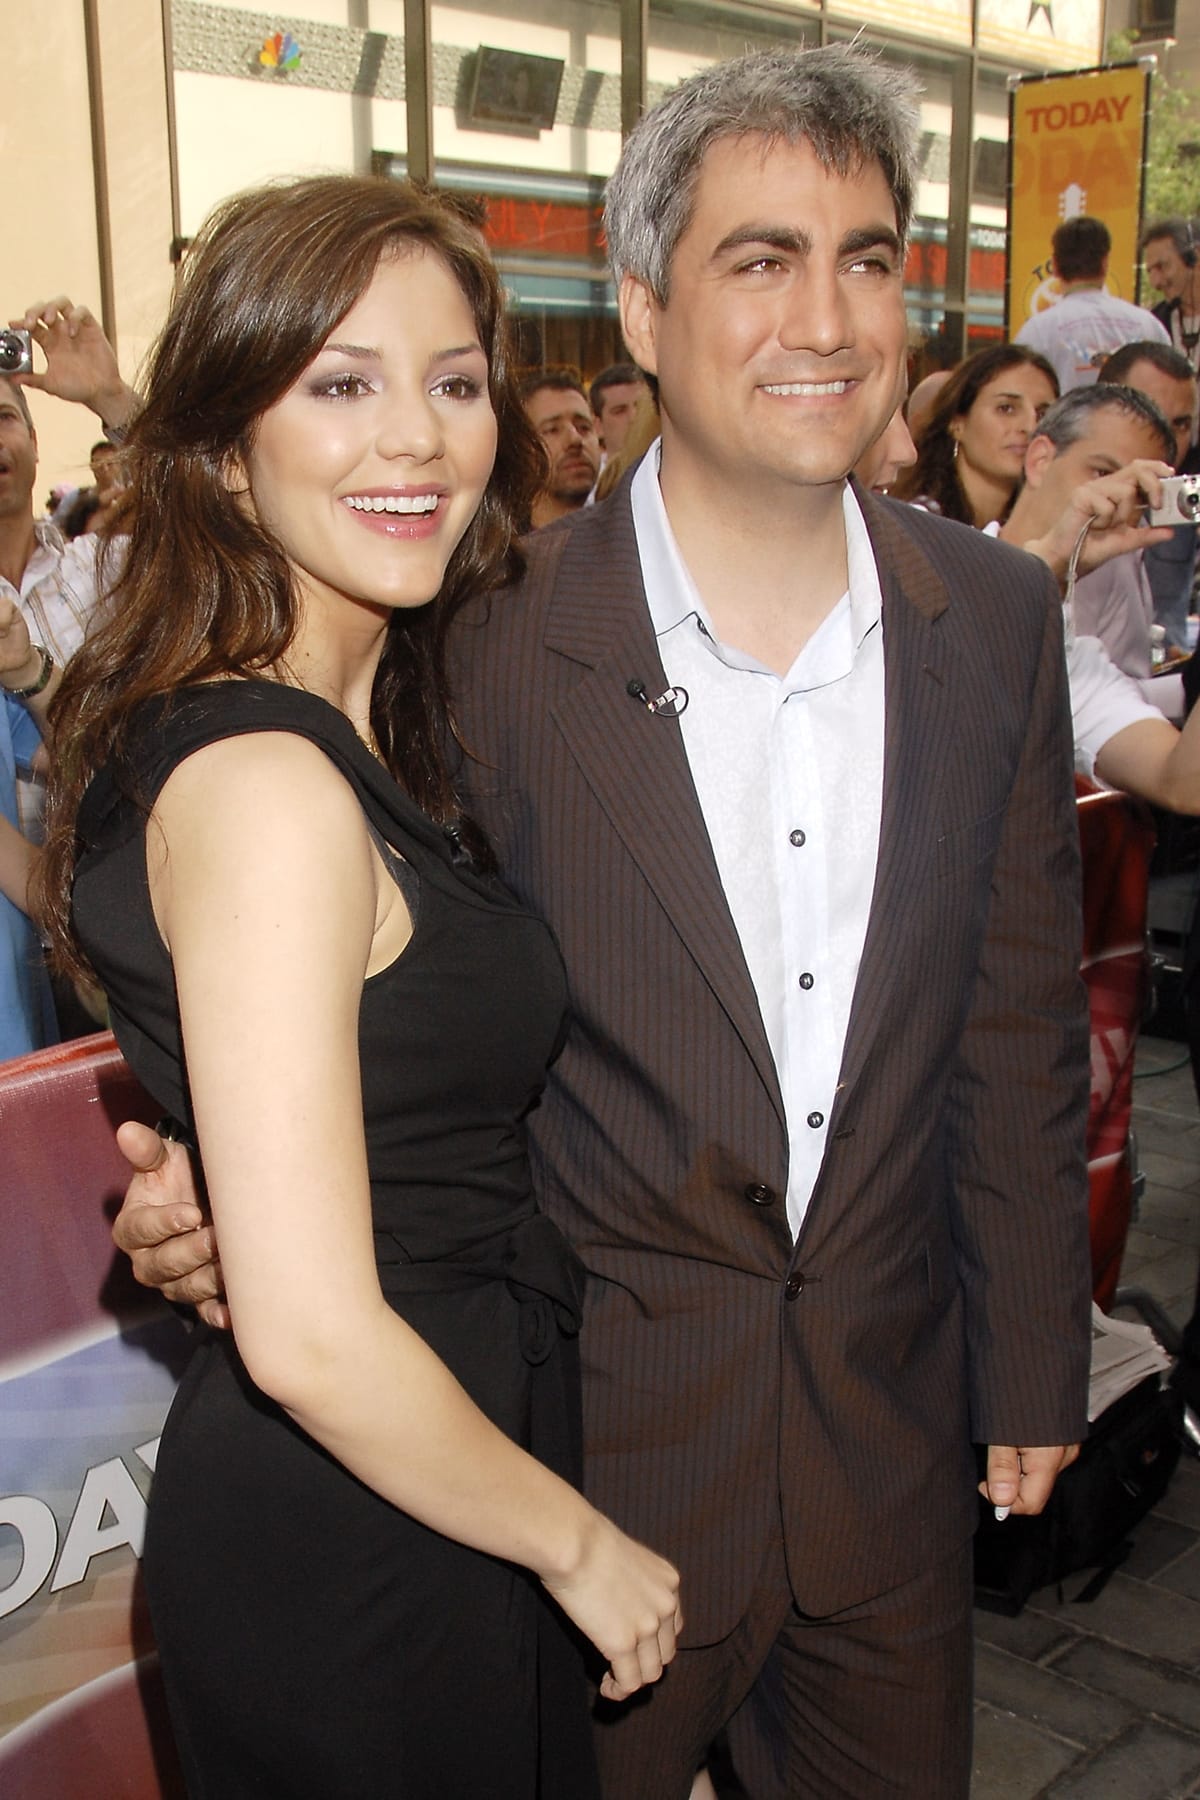 Taylor Hicks (R) beat out runner-up Katharine McPhee on season 5 of American Idol in 2006 with the help of his loyal fanbase